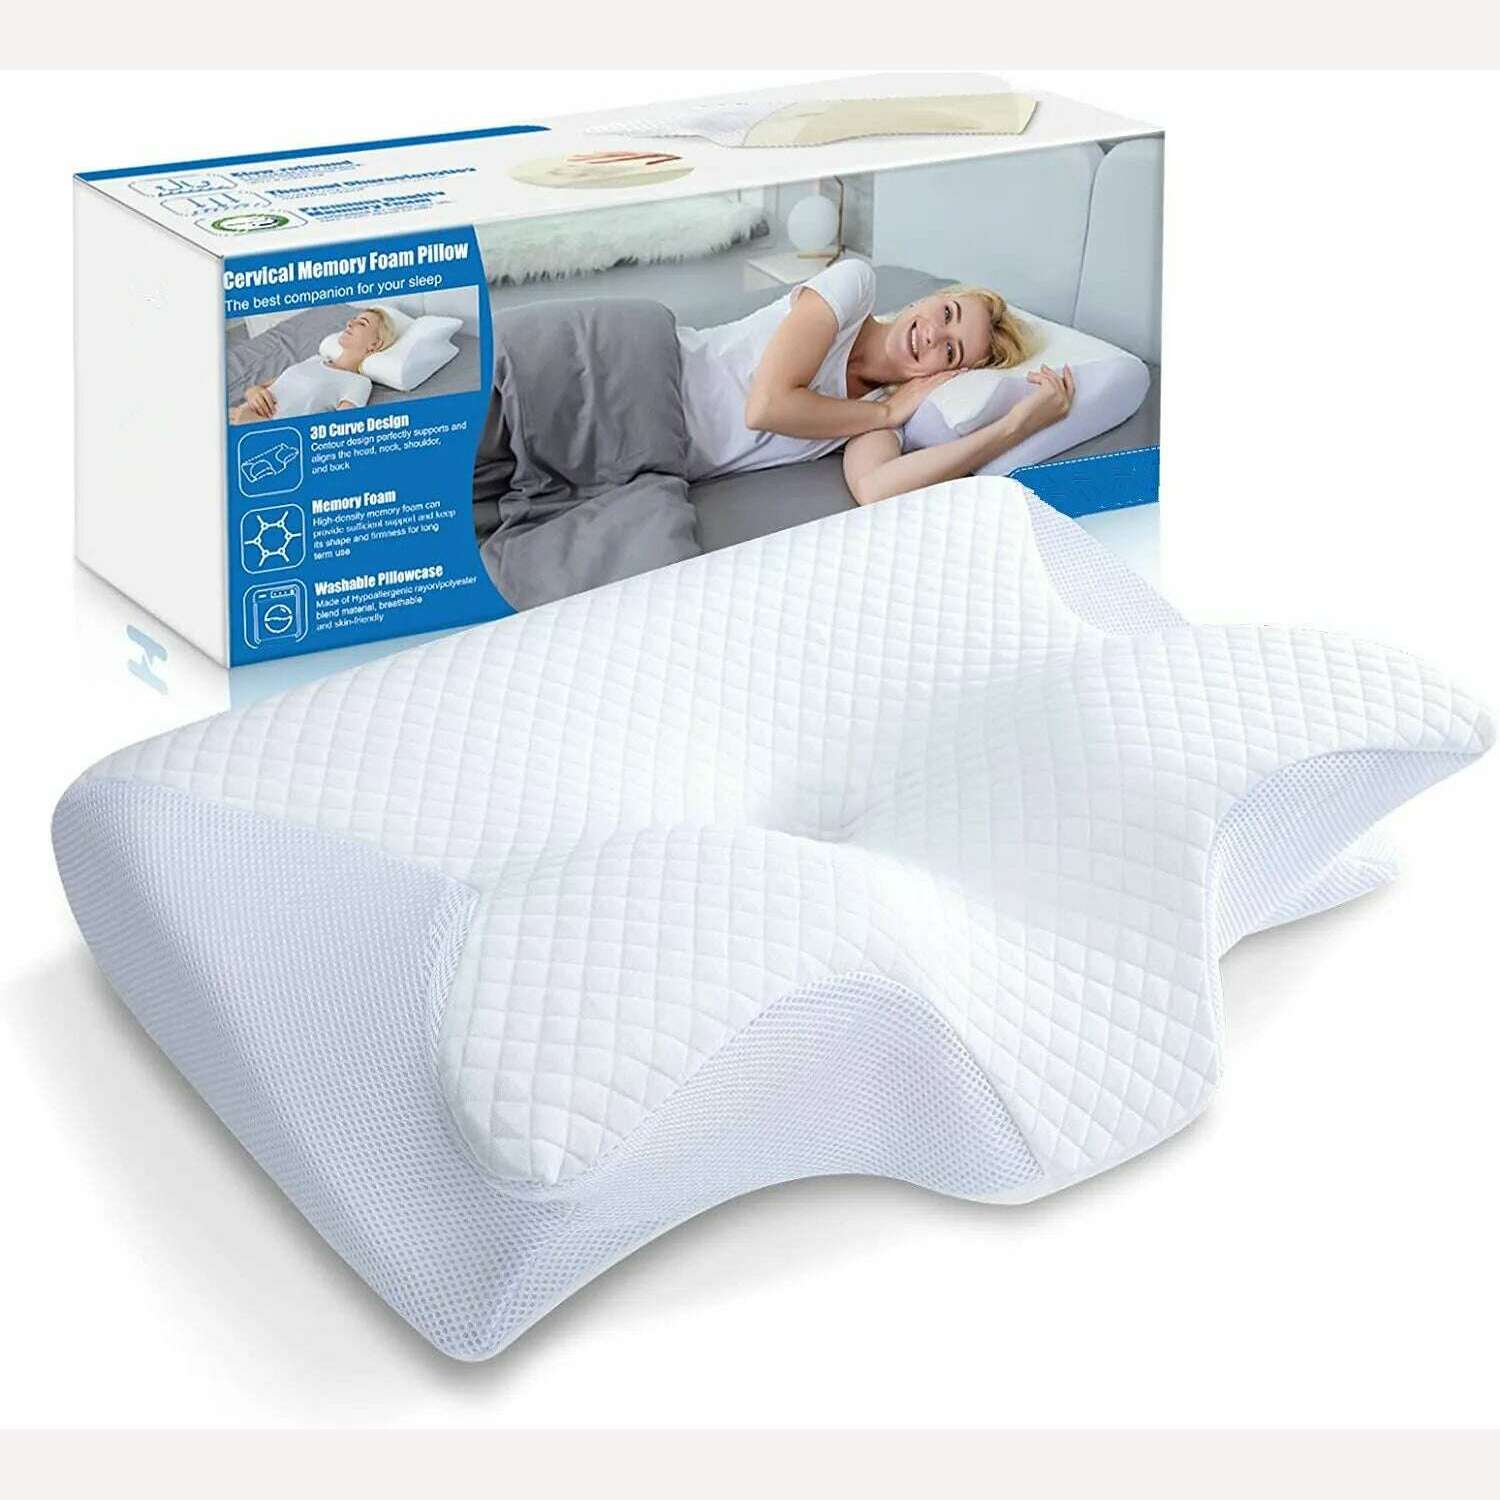 KIMLUD, Cervical Memory Foam Pillow Contour Pillow for Neck and Shoulder Pain Orthopedic Sleep Neck Contour Pillow for Side Sleeping, WHITE / No box, KIMLUD Womens Clothes